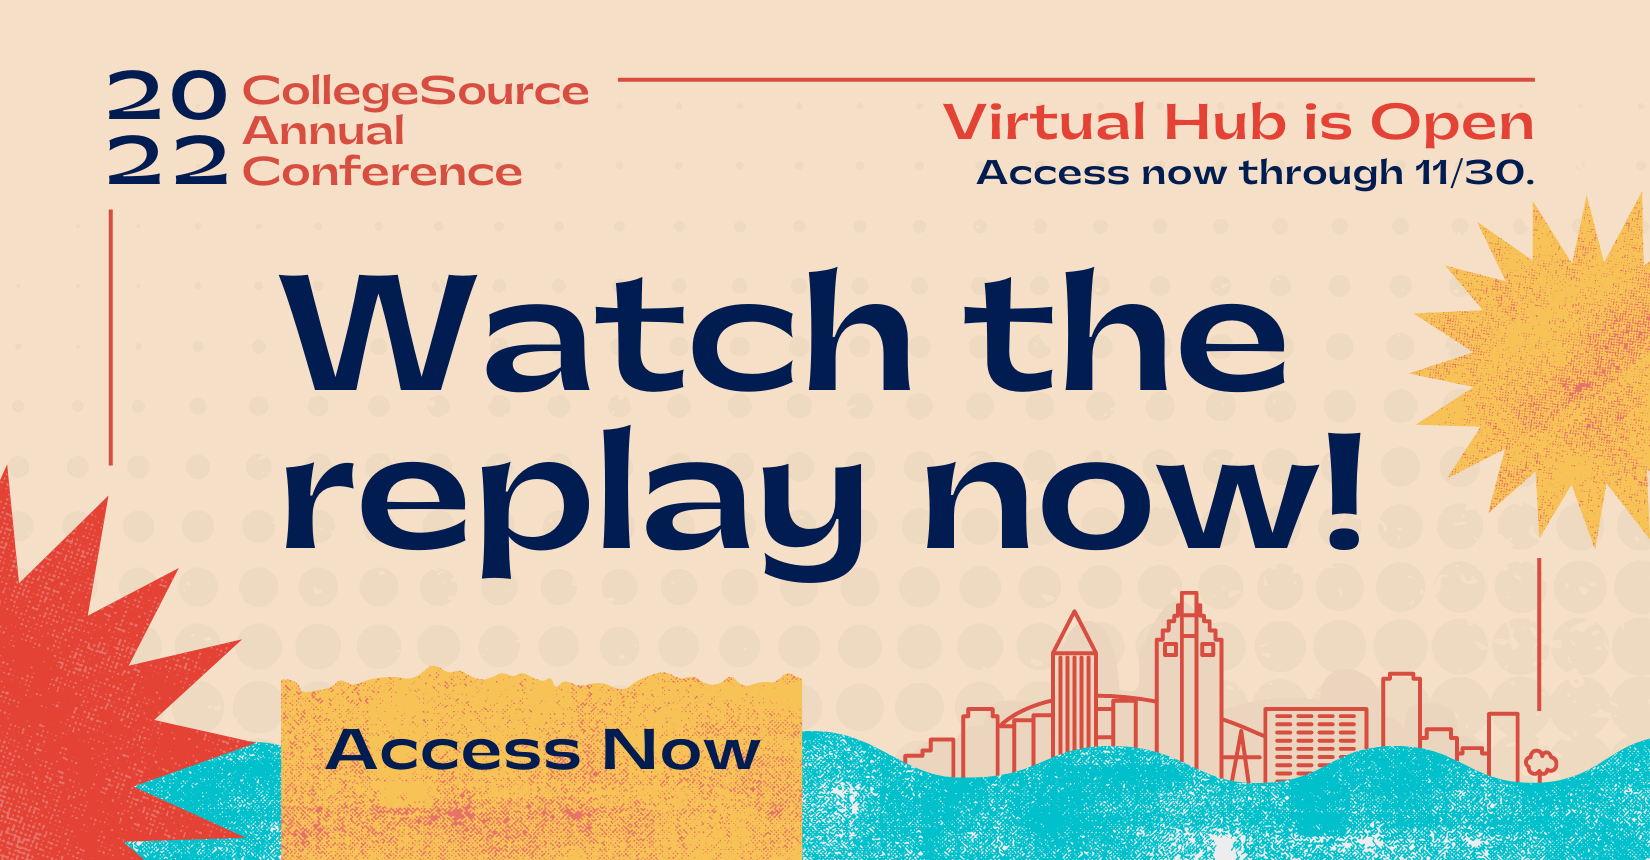 Watch the session replay of the 2022 CollegeSource Annual Conference through 11/30.